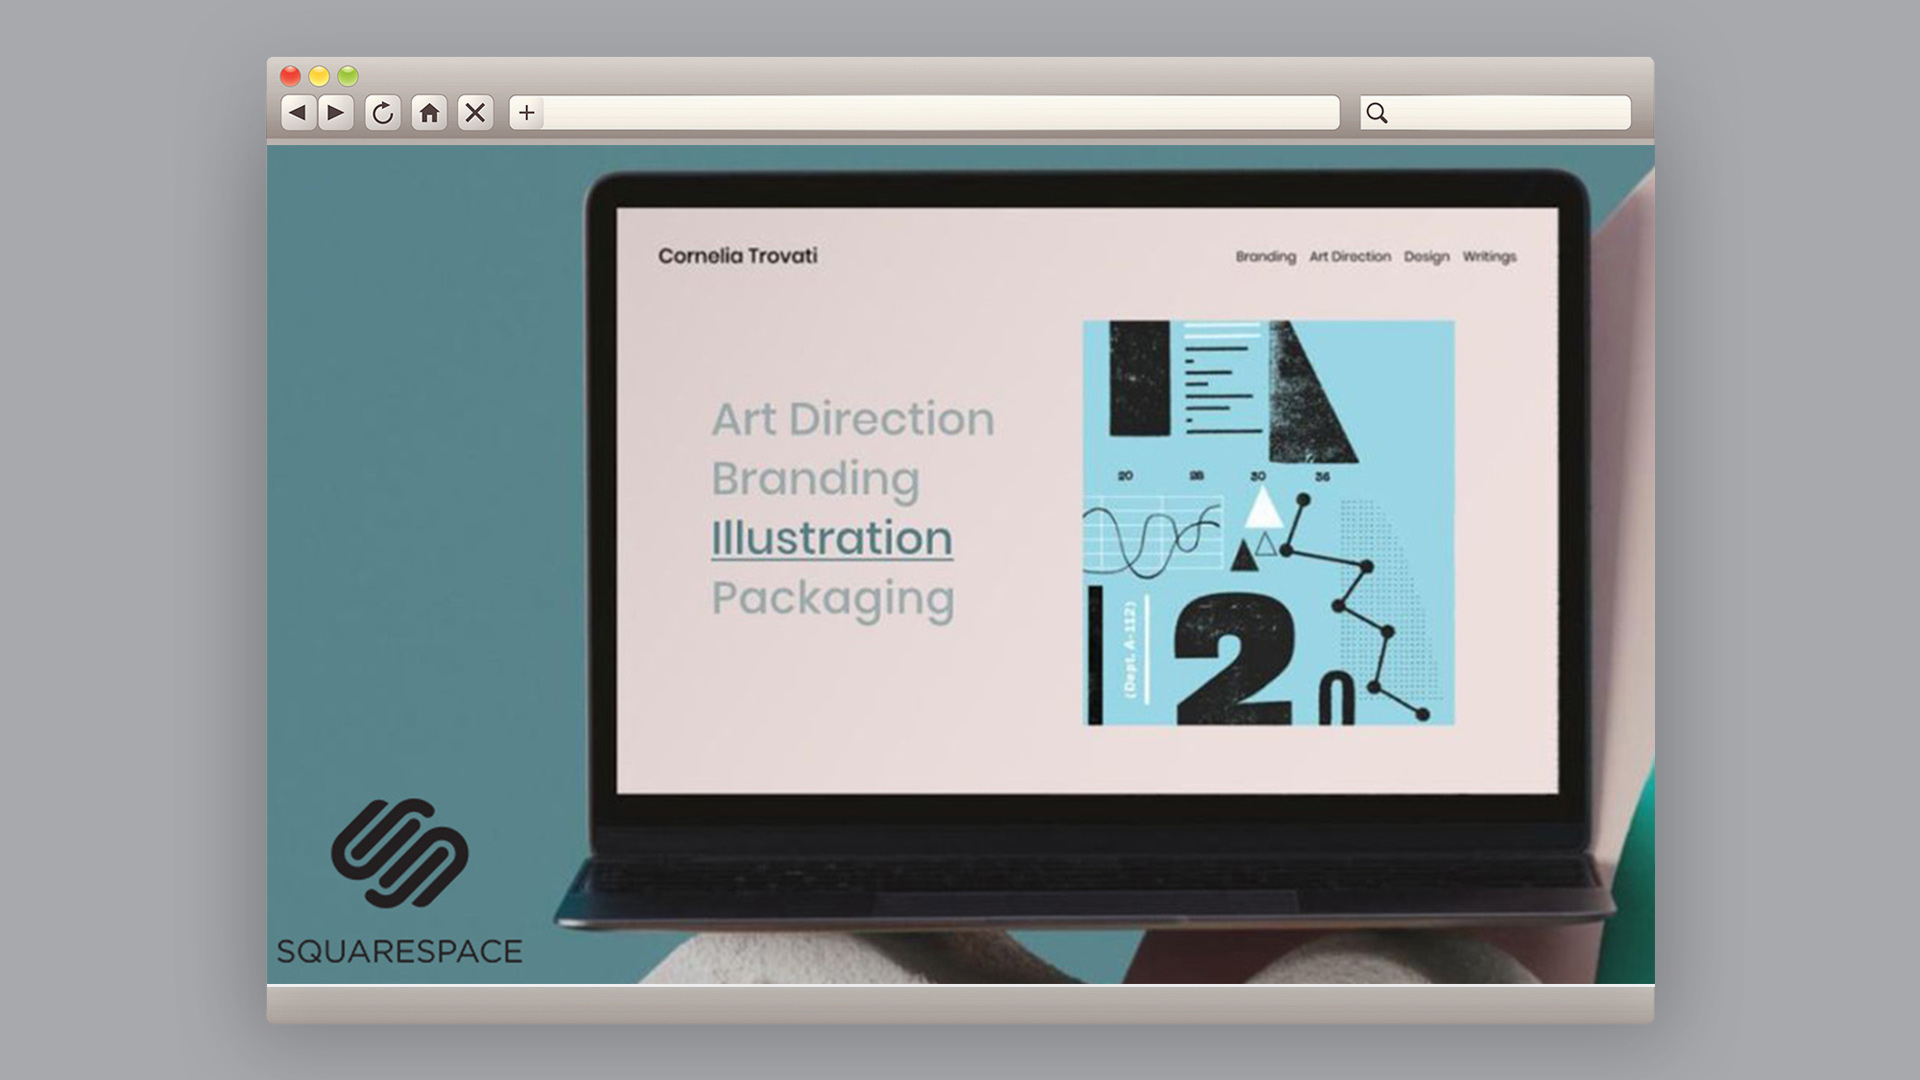 Homepage of Squarespace, one of the best website builders for artists, showing example website